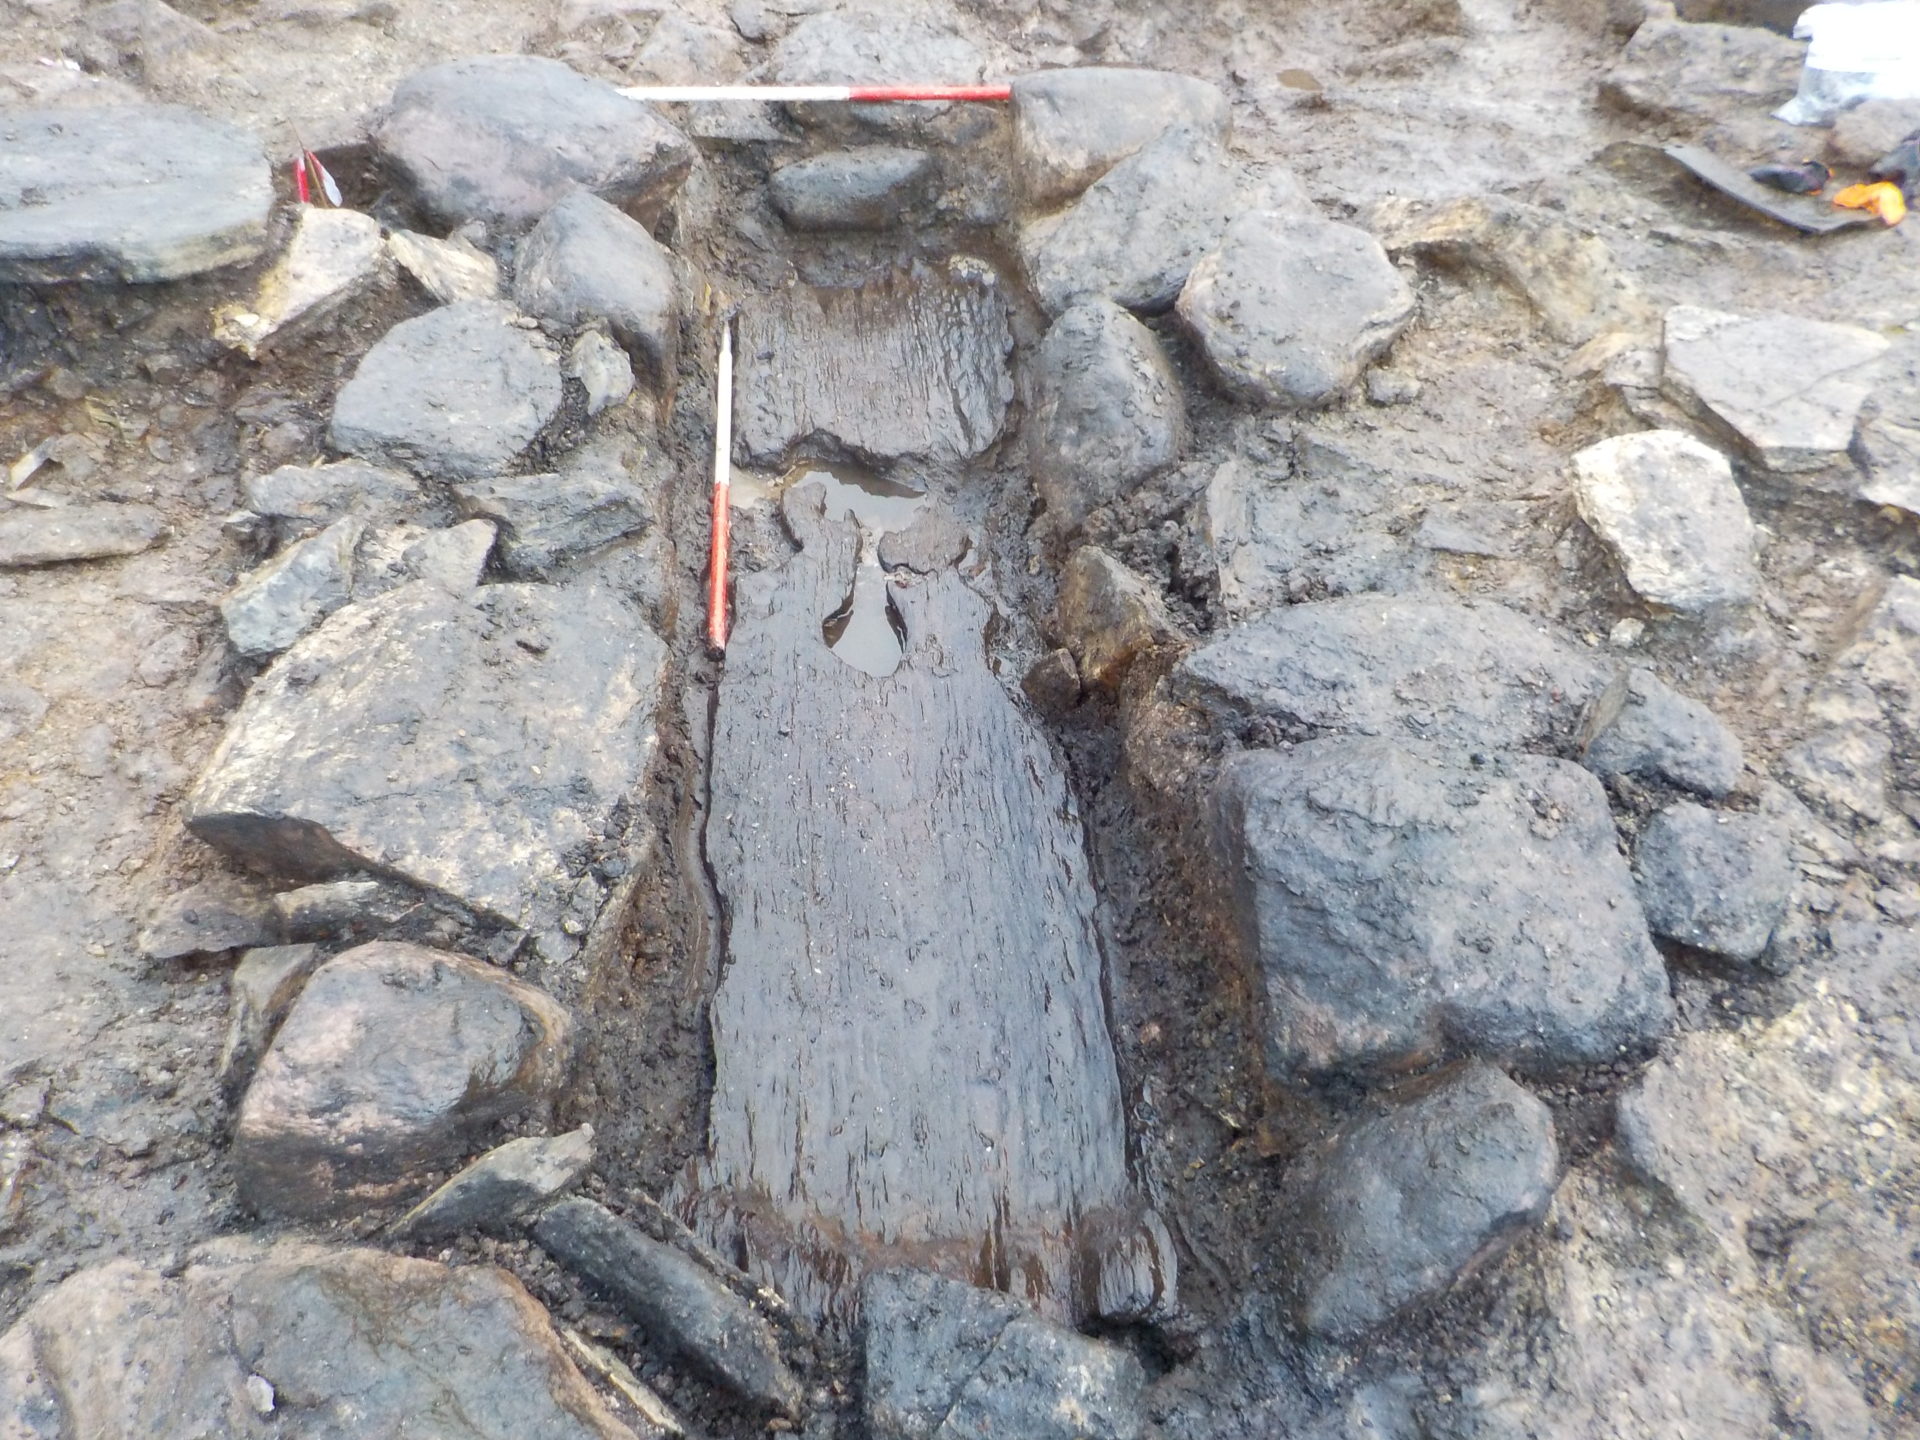 You are currently viewing Ag scoilteadh na gcloch! A review of  the burnt mounds excavated along the N22 Macroom Bypass!